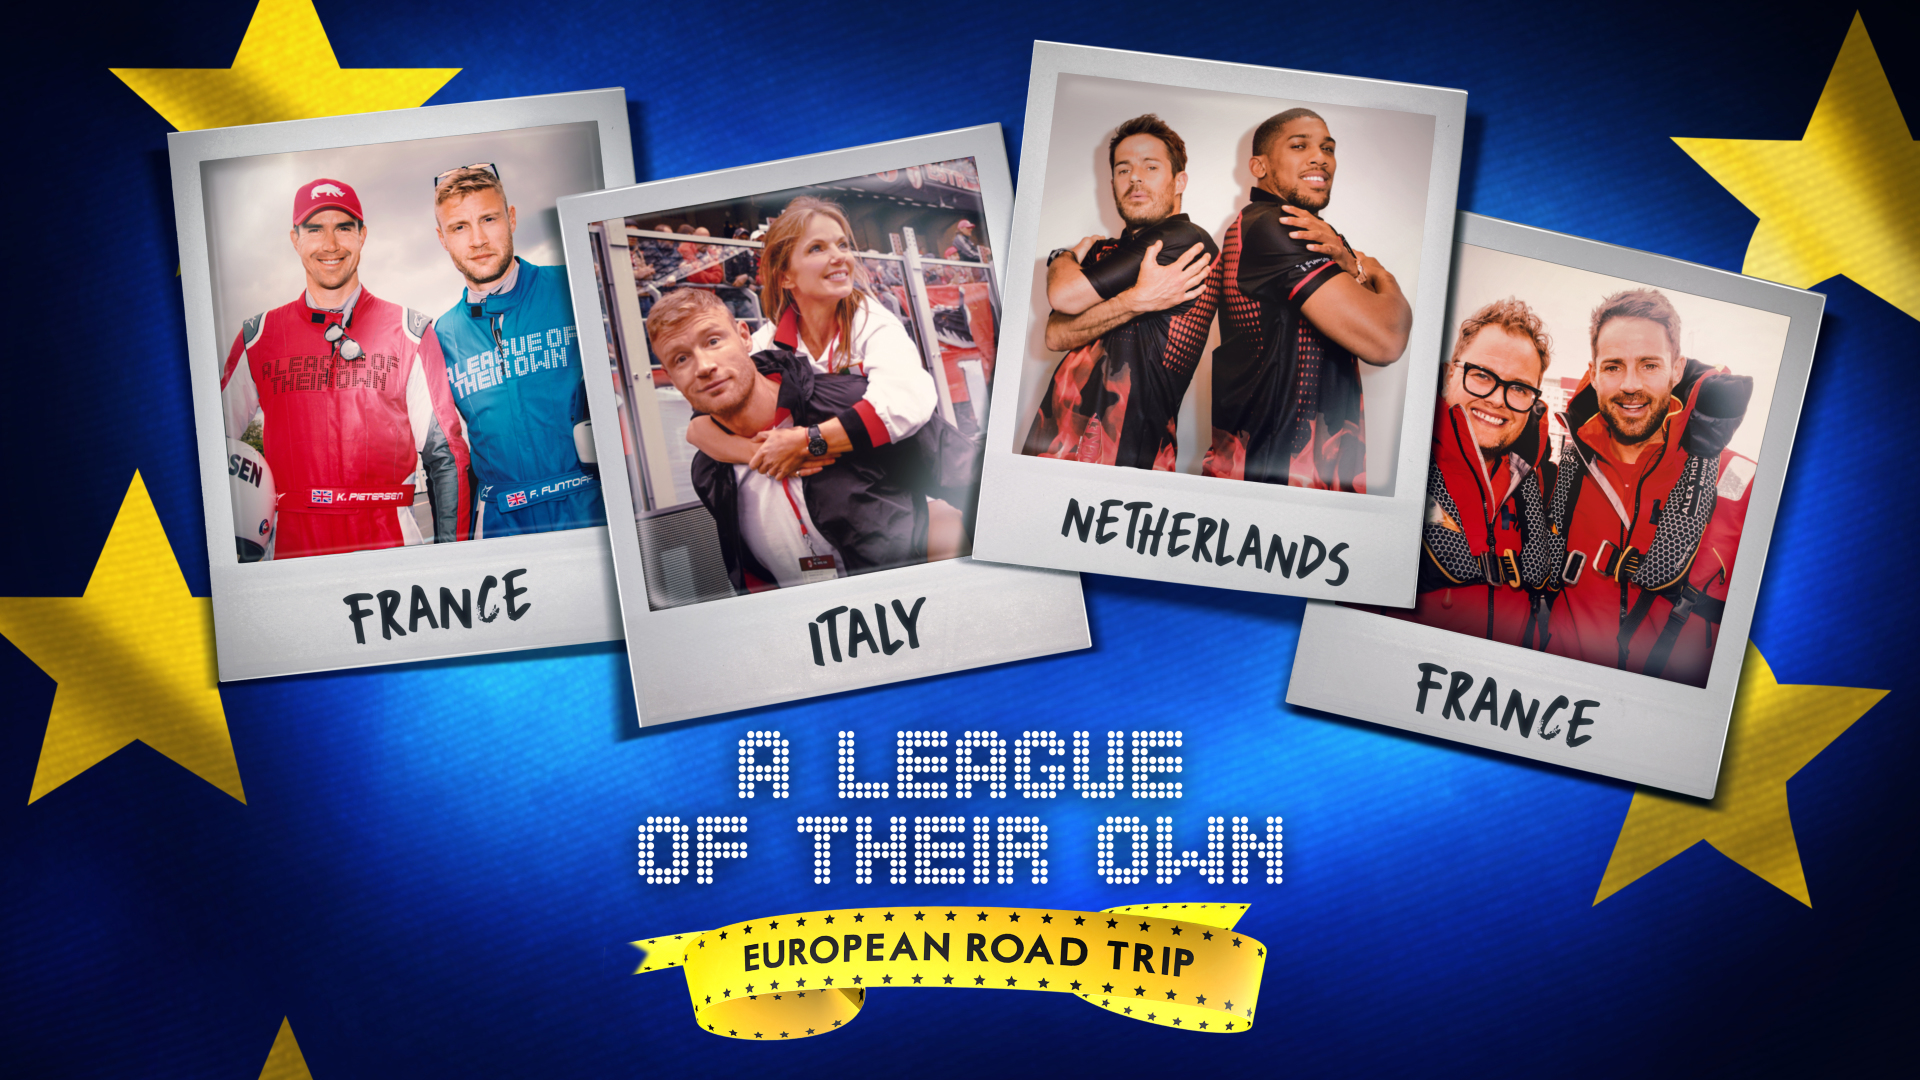 A League Of Their Own European Road Trip promotional poster